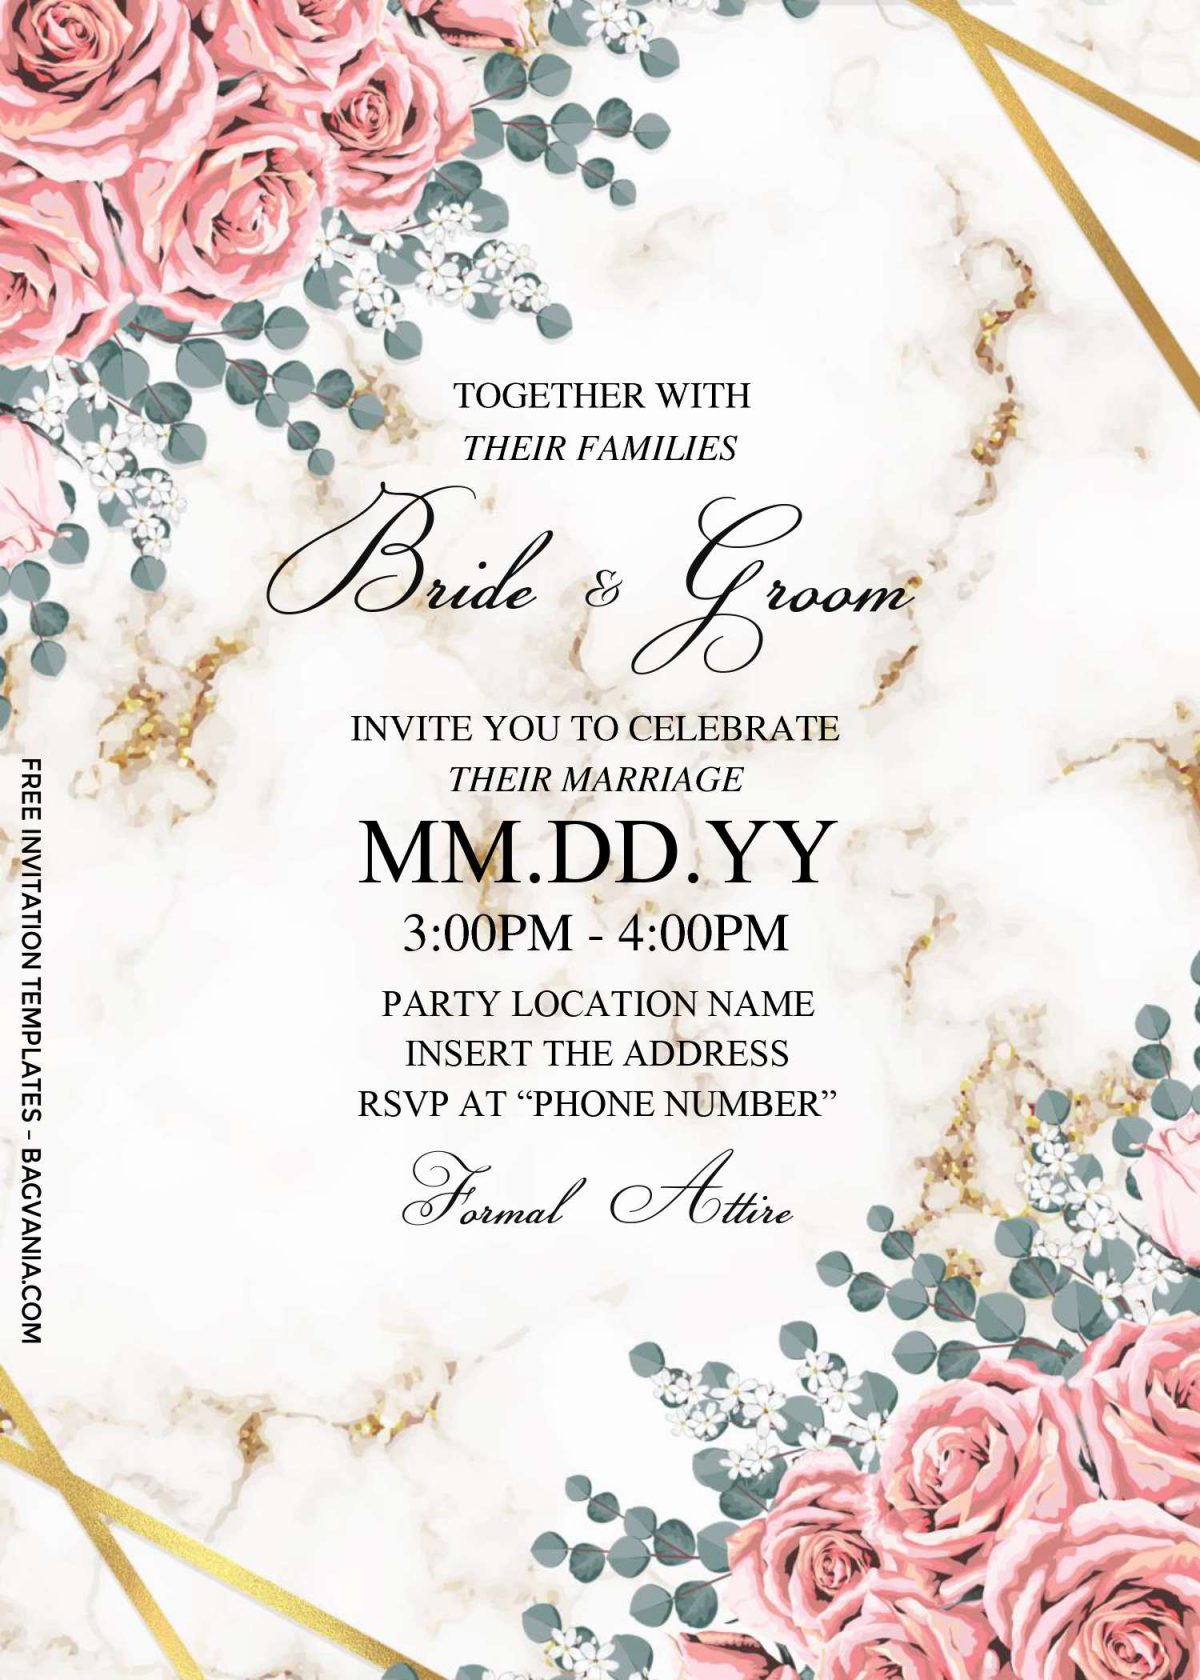 Free Dusty Rose Wedding Invitation Templates For Word and has gold marble veins background